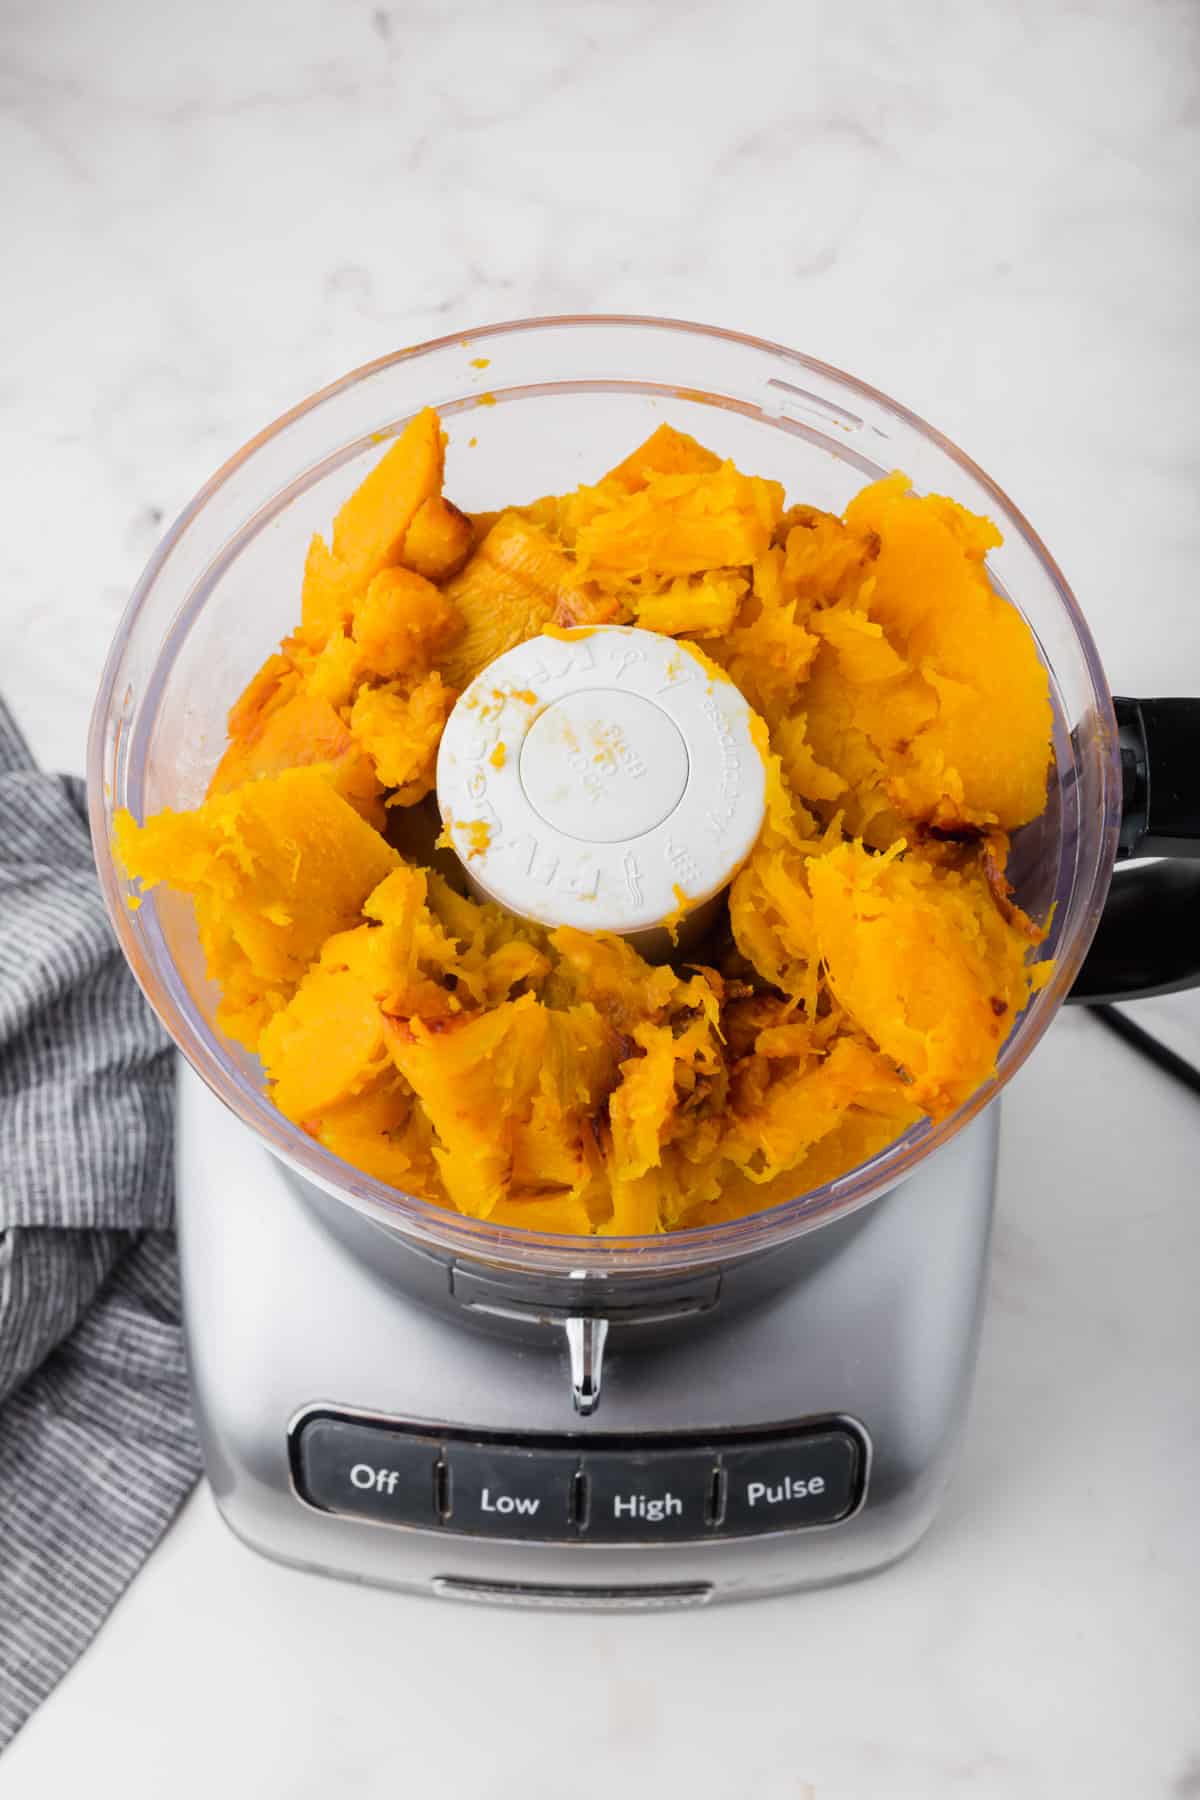 A food processor with chunks of roasted pumpkin in it before pureeing together.